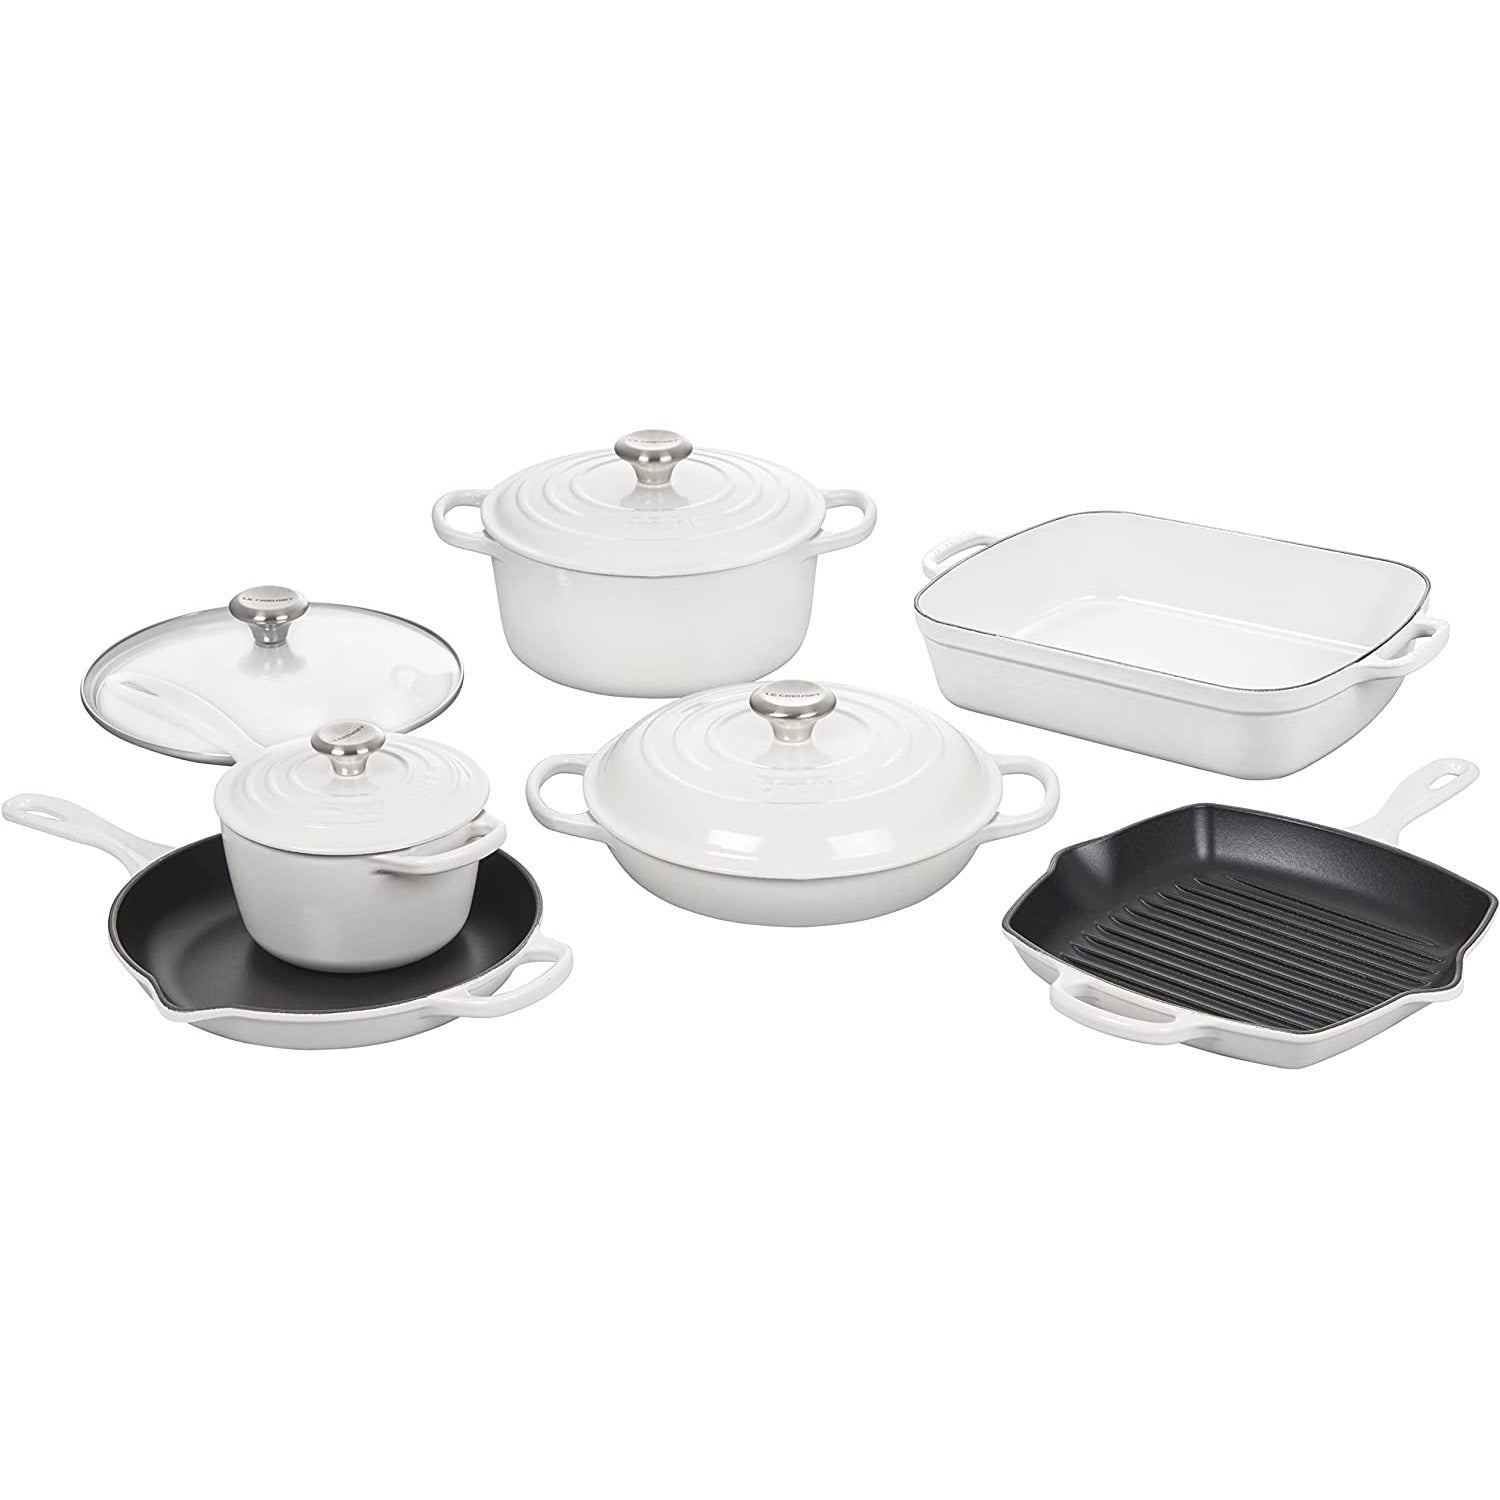 Le Creuset Signature Enameled Cast Iron 6-Piece Cookware and